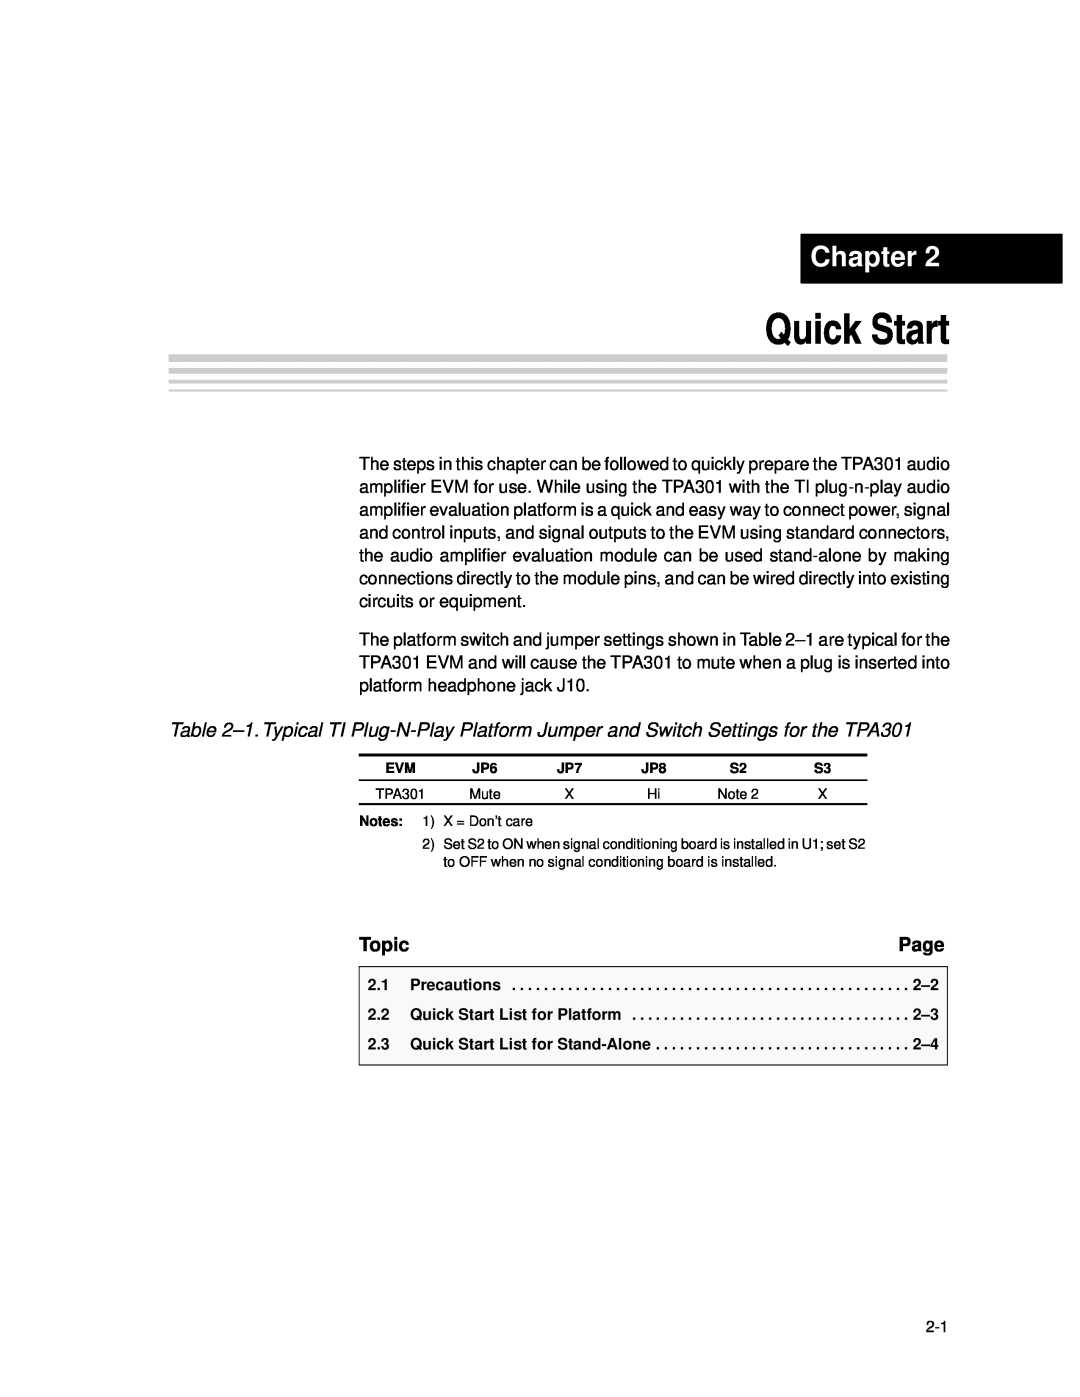 Texas Instruments TPA301 manual Chapter, Page, Topic, Precautions, Quick Start List for Platform 